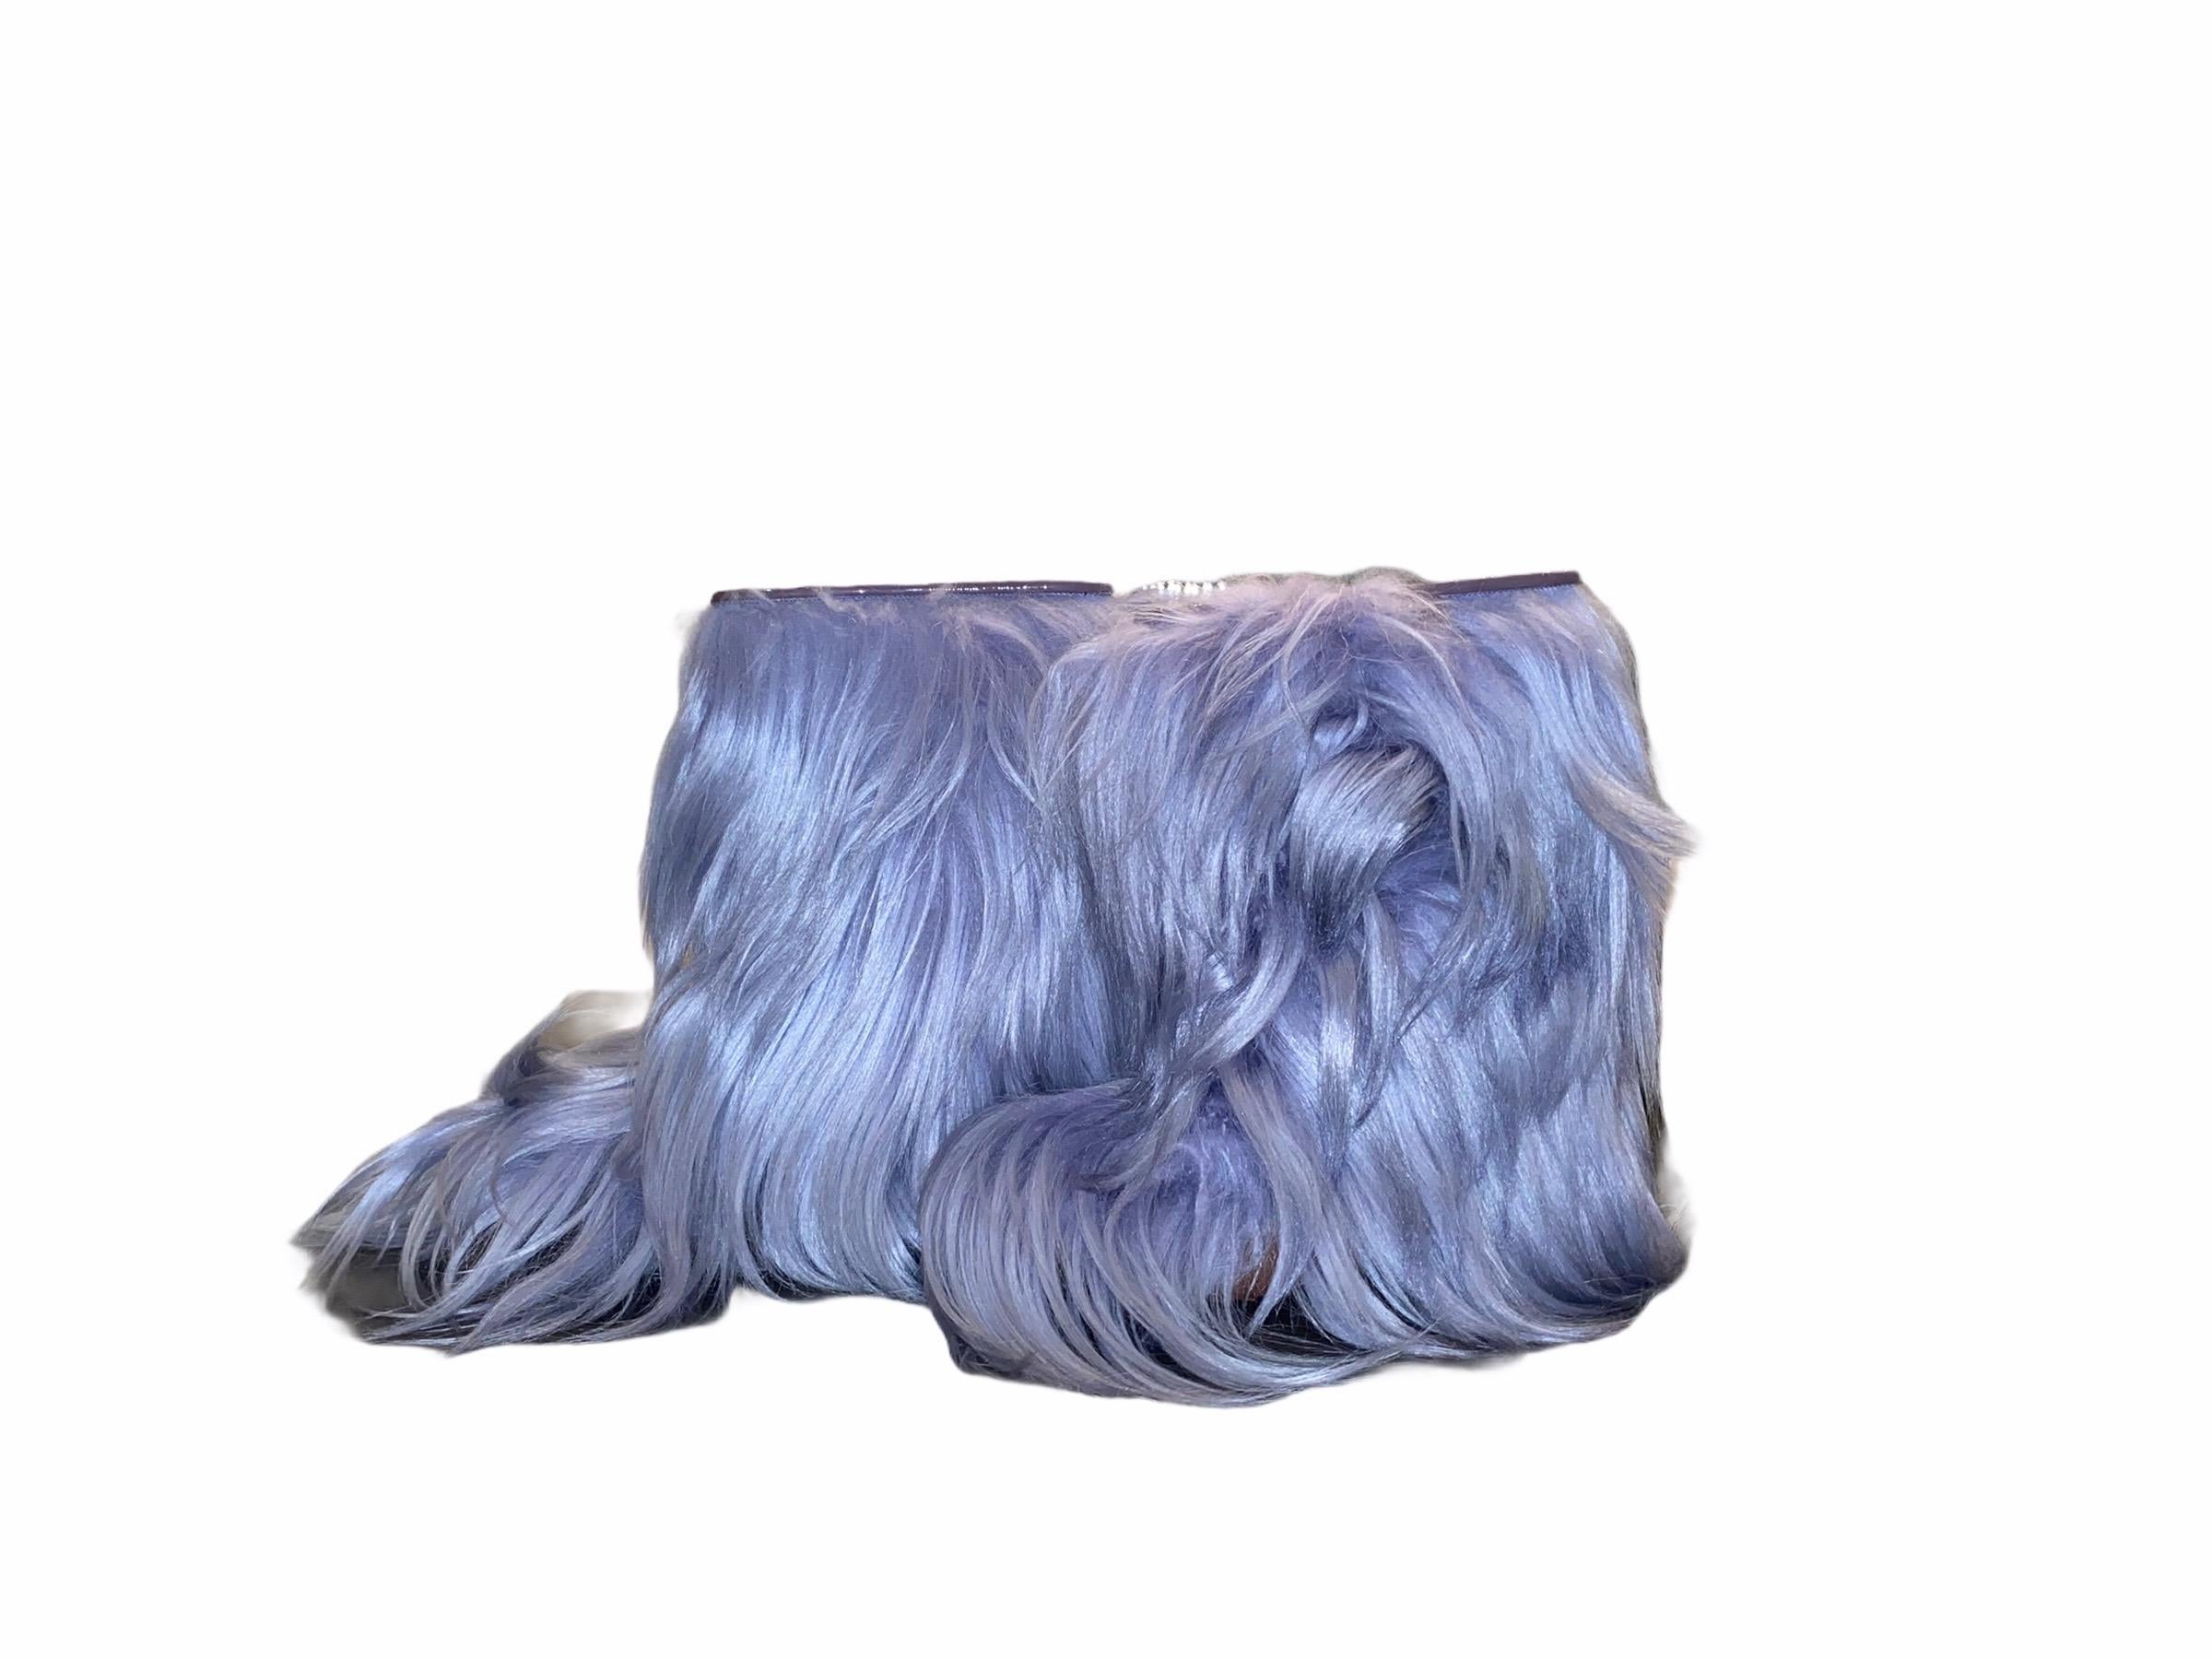 GORGEOUS

SEE by CHLOE

FUR SNOW WINTER BOOTS

PERFECT FOR THE WINTER SEASON

DETAILS:

A See by CHLOE signature piece that will last you for years
Lavender color with beautiful long fur trimmings
Fully lined 
Simply pulls on
Hits above the